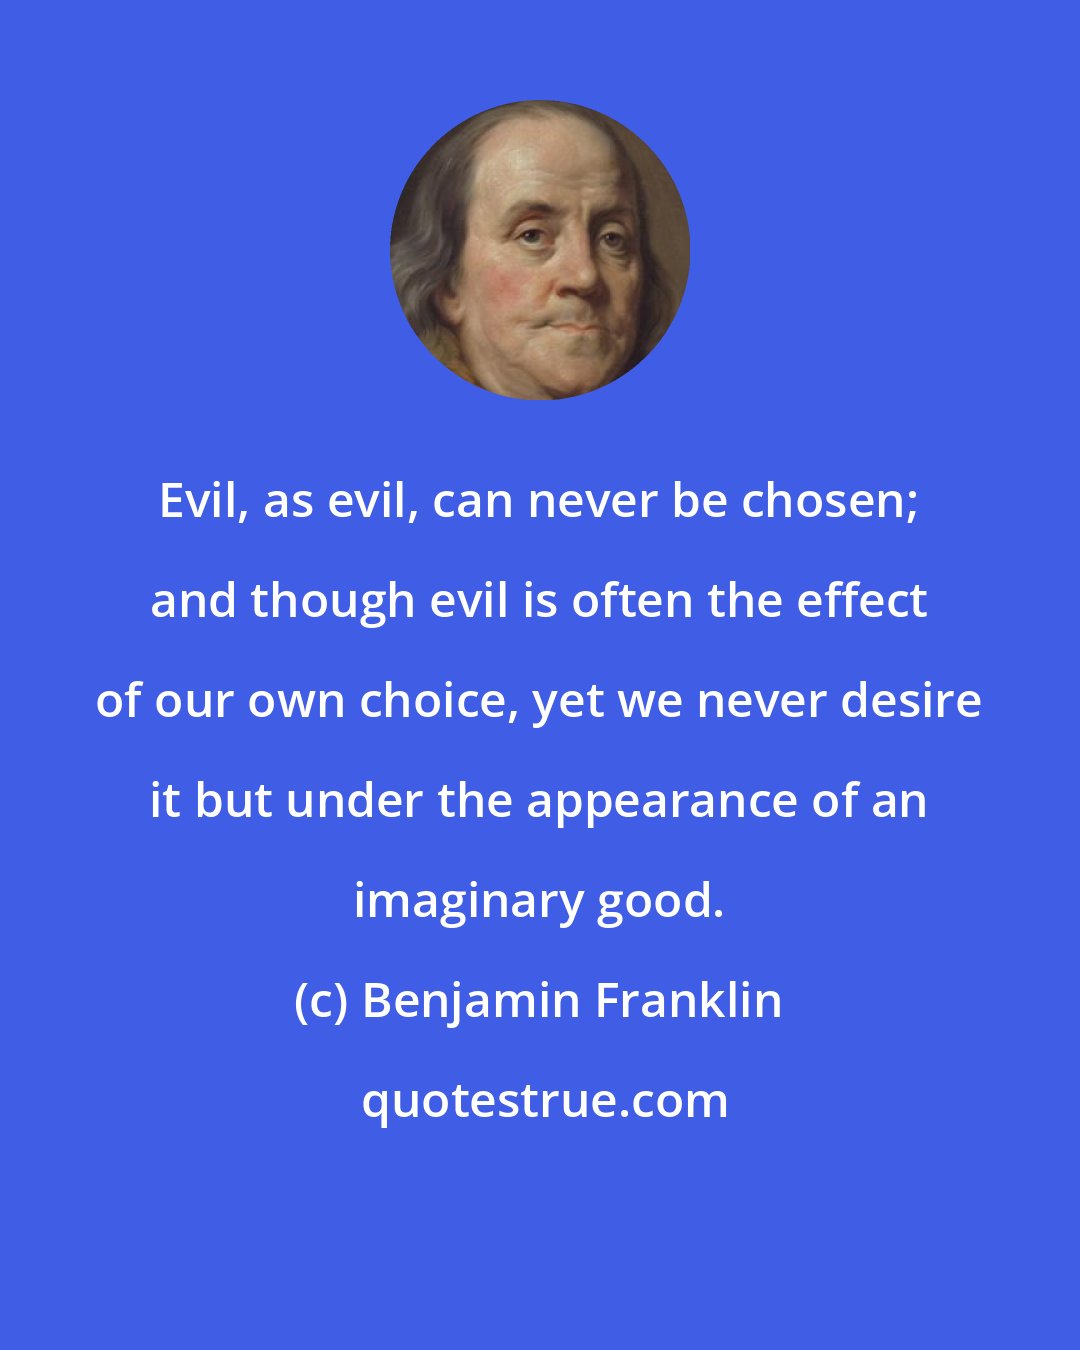 Benjamin Franklin: Evil, as evil, can never be chosen; and though evil is often the effect of our own choice, yet we never desire it but under the appearance of an imaginary good.